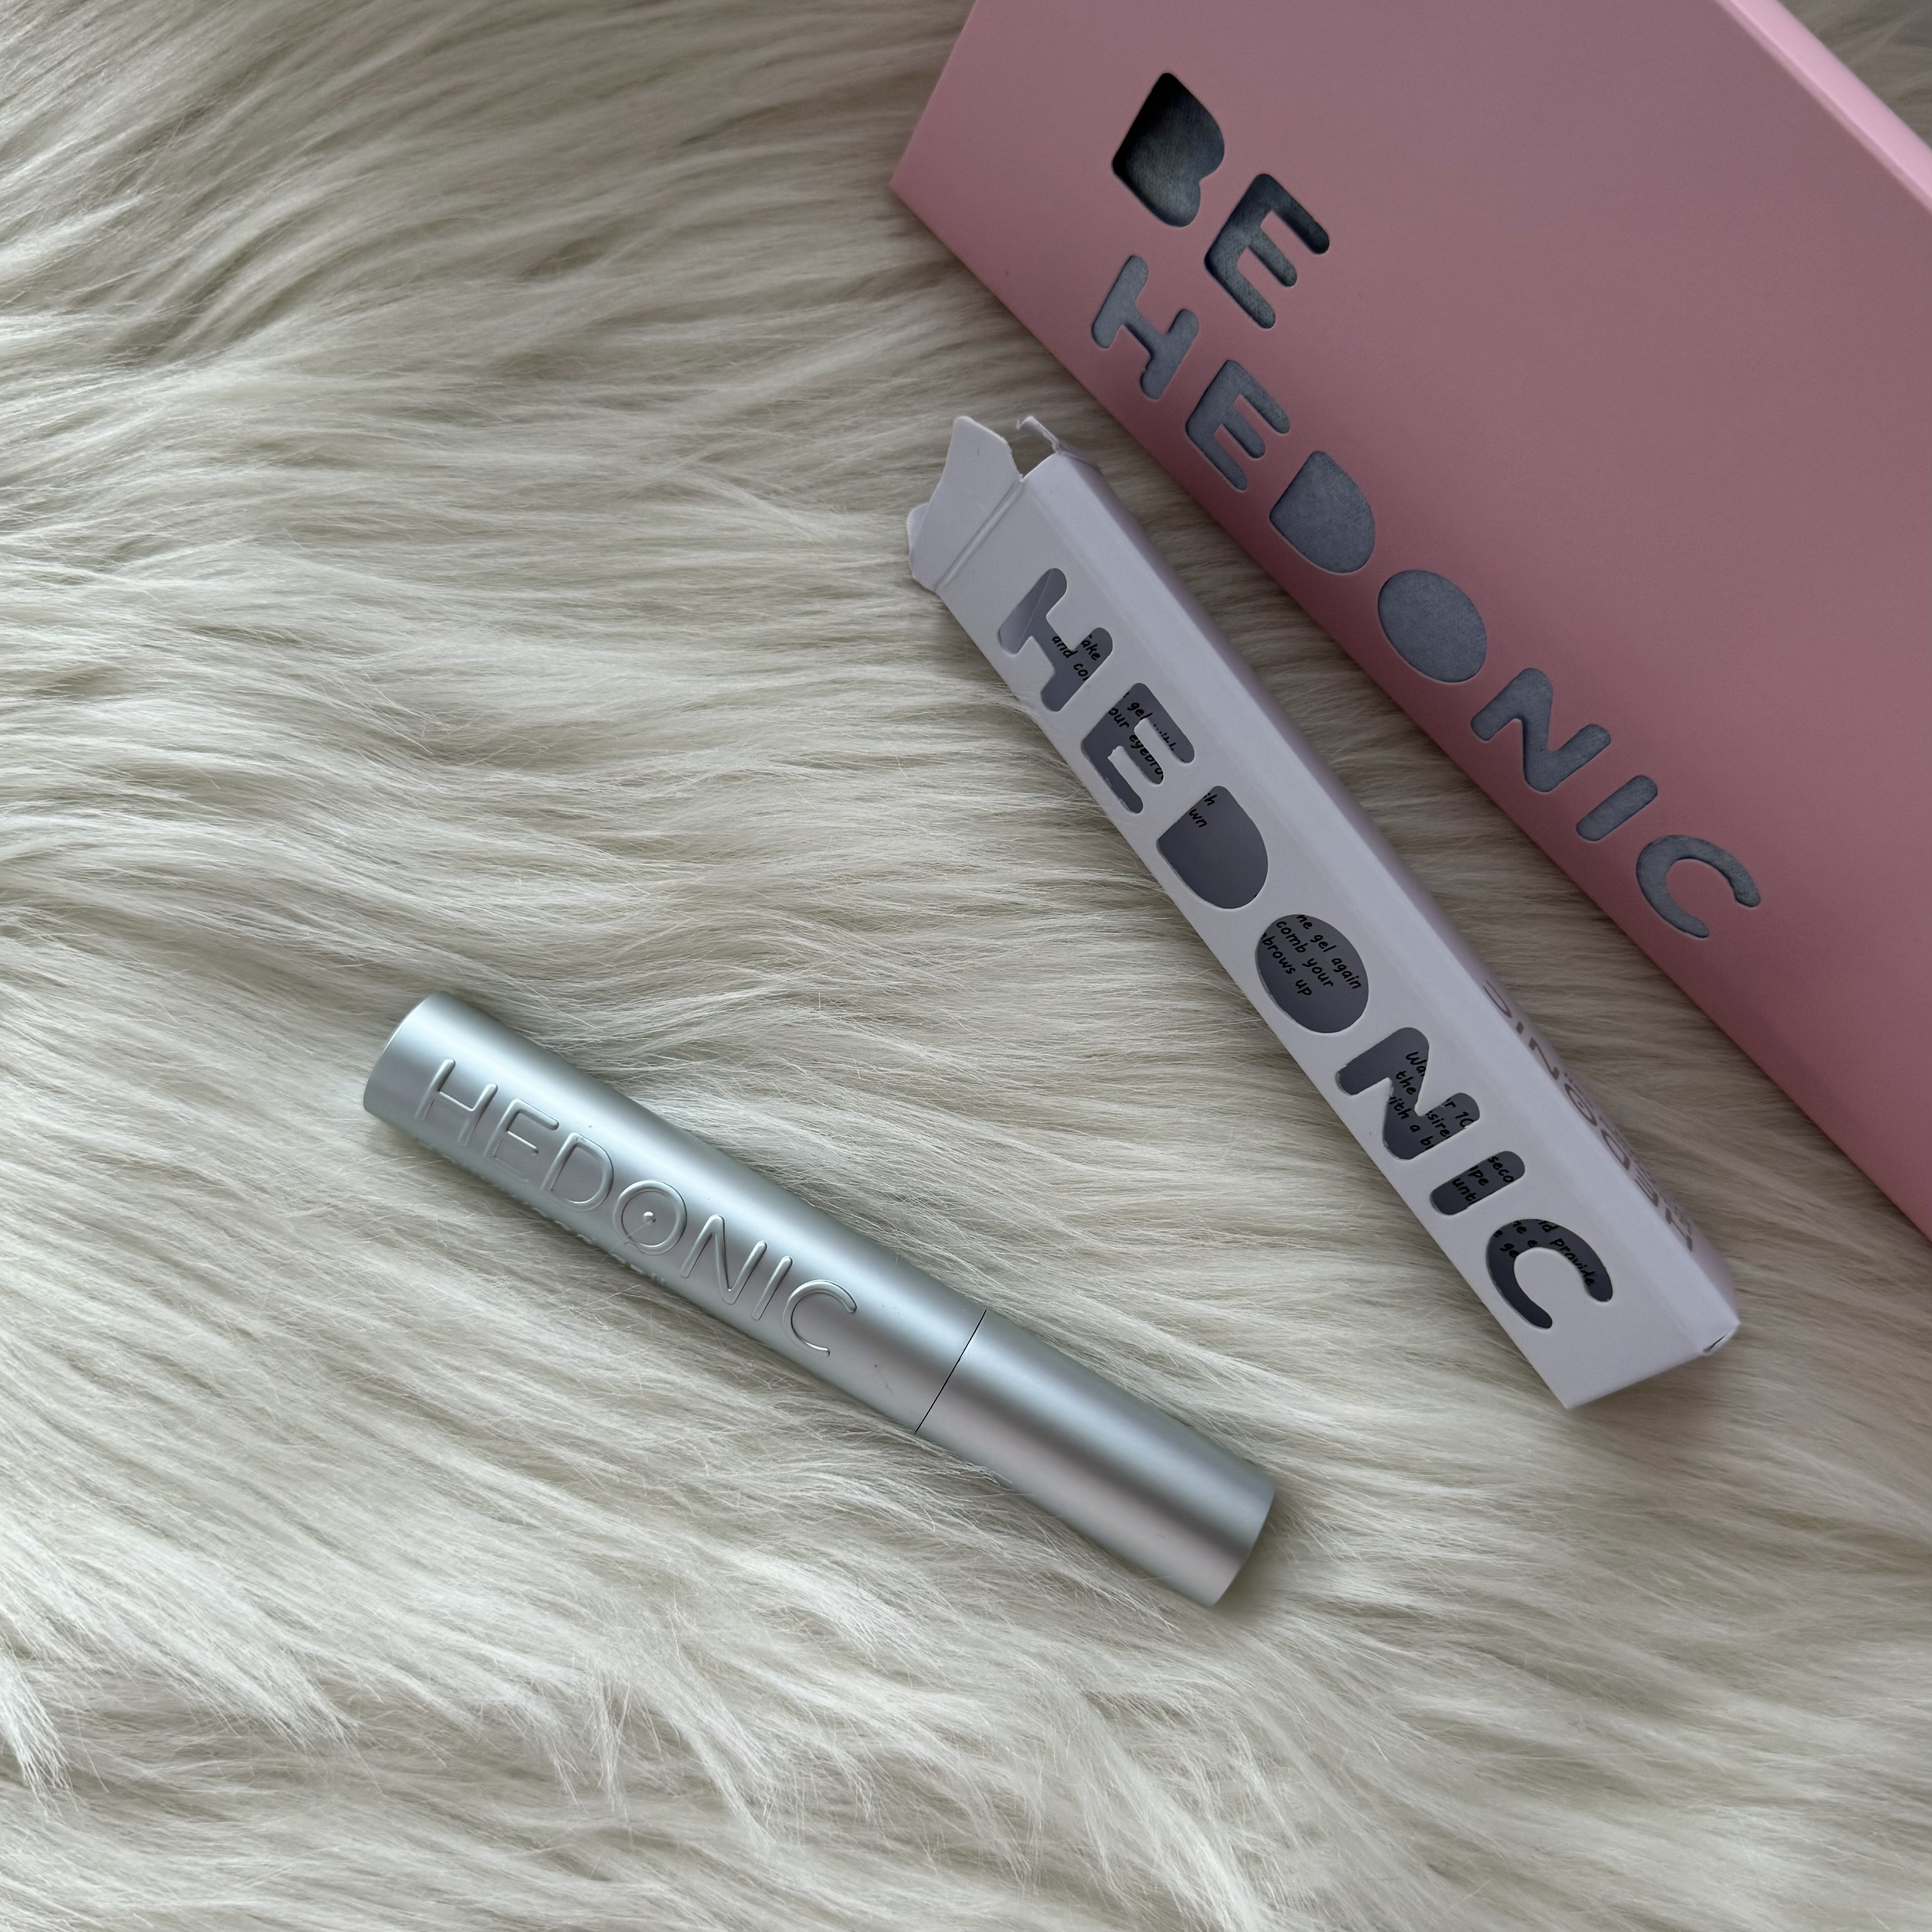 HEDONIC HOLLYWOOD CALL CLEAR BROW GEL